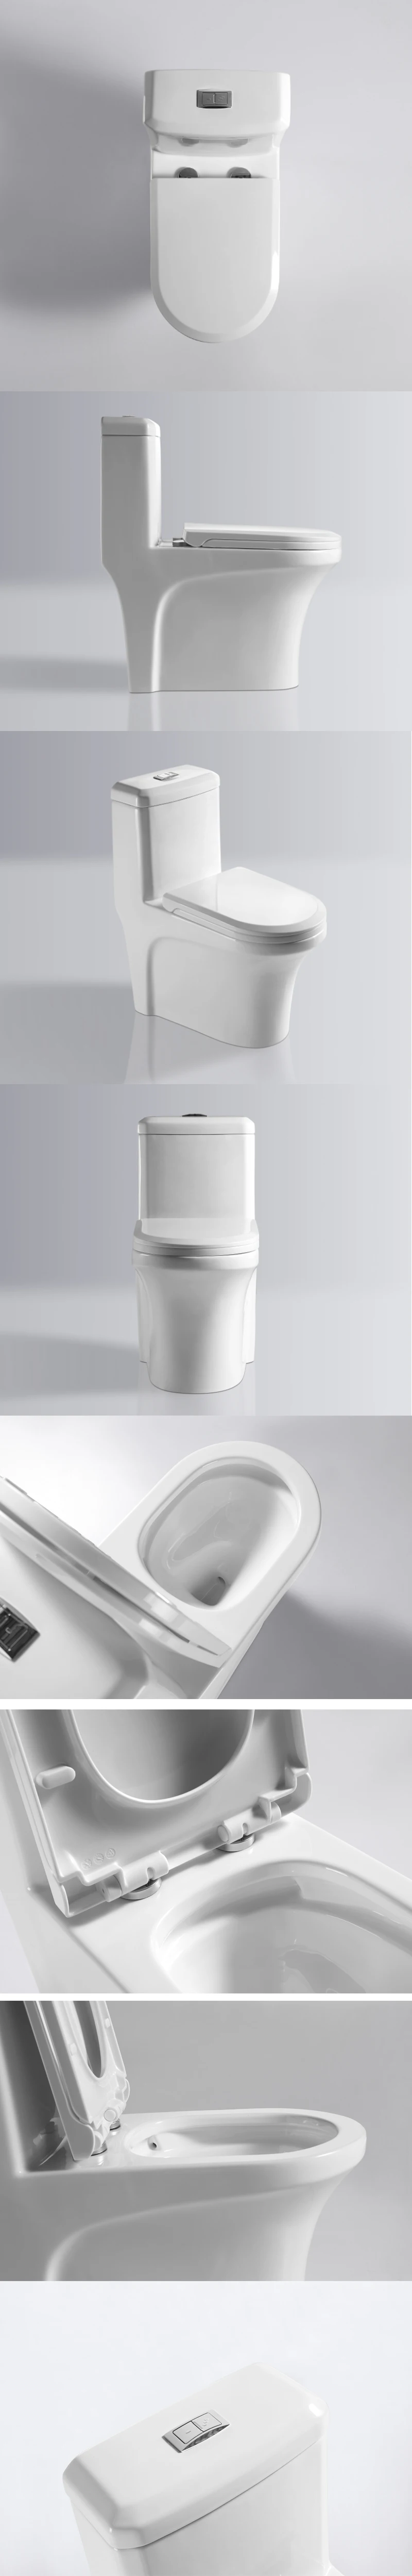 Competitive price sanitary ware white glazed s-trap bathroom double siphonic flush toilet for sell